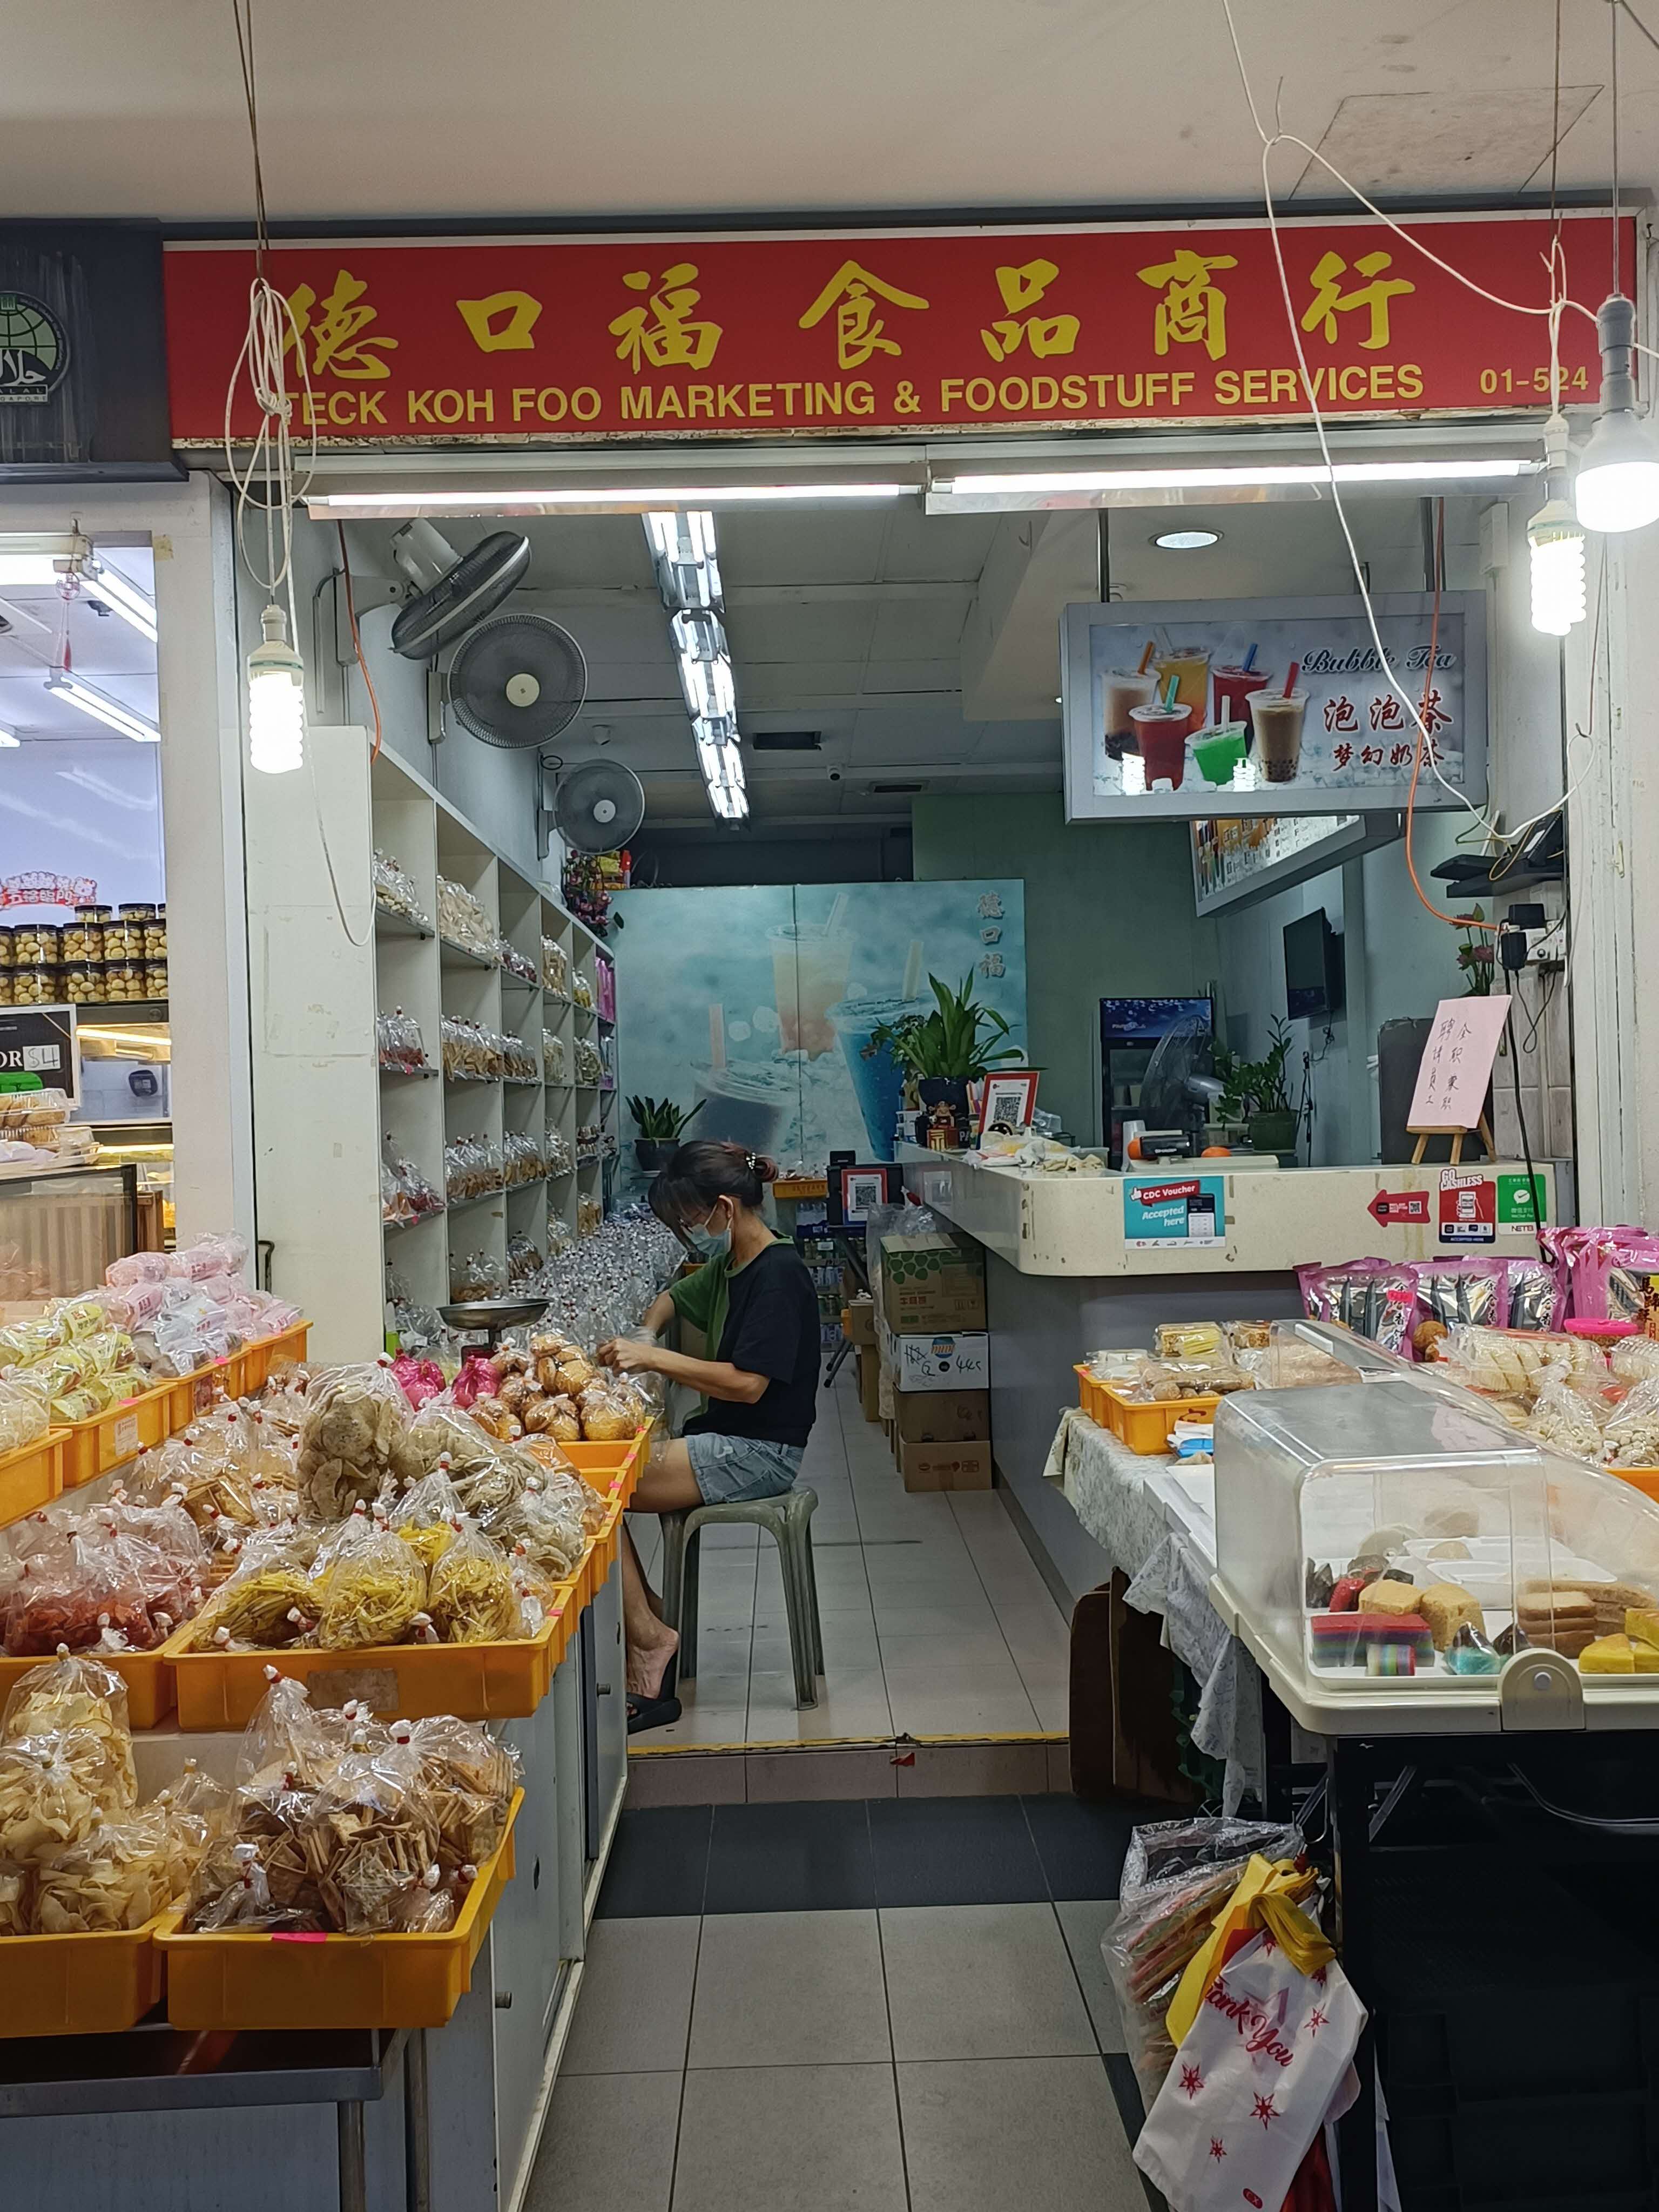 Teck Koh Foo Marketing And Foodstuff Services In Fajar Shopping Centre